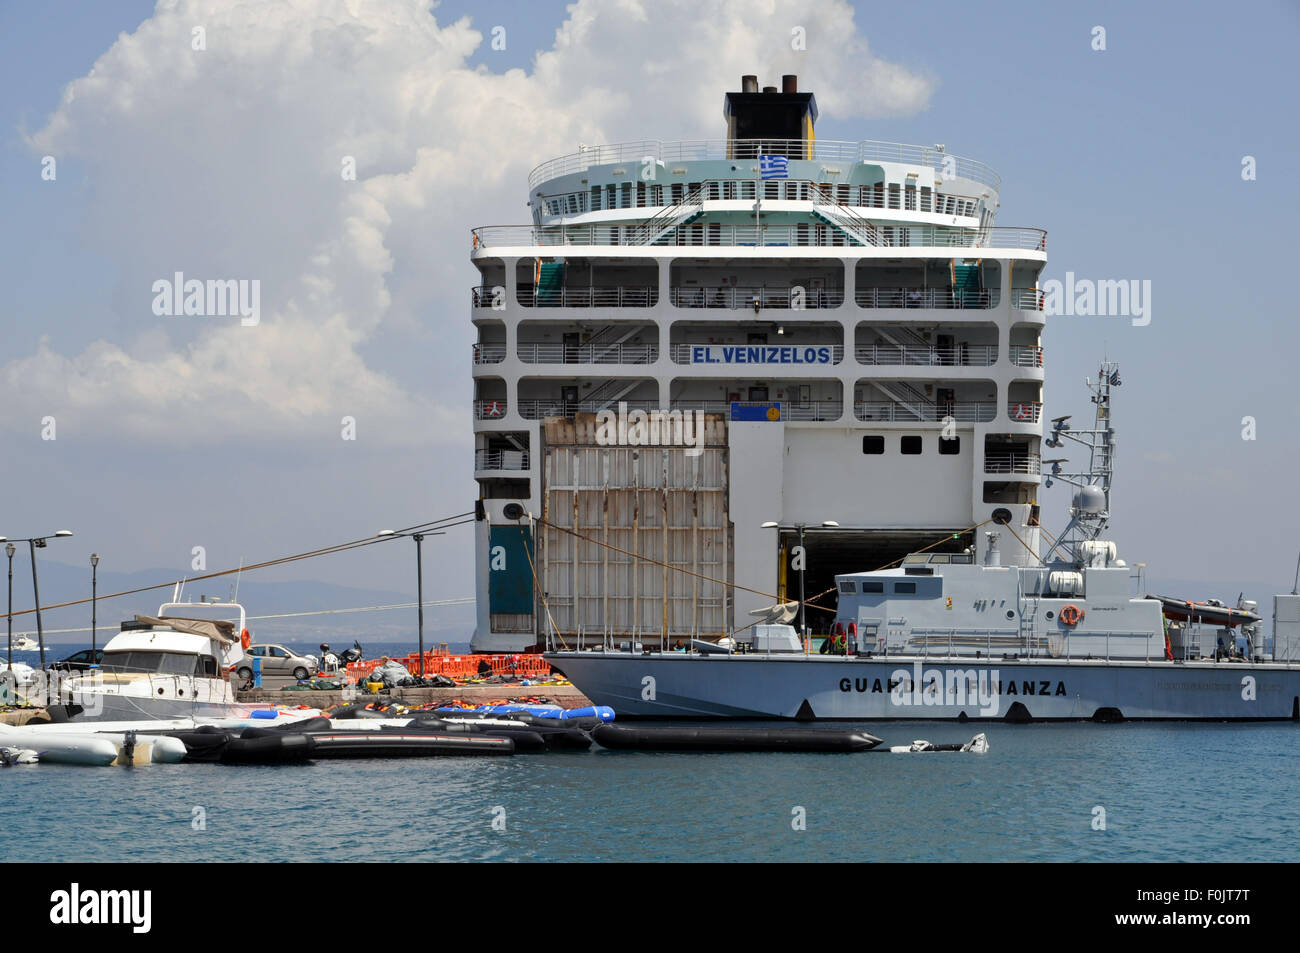 Kos, Greece. 16th Aug, 2015. Migrants and refugees wait at the port next to the ferry Eleftherios Venizelos after crossing from Turkey, at the southeastern island of Kos, Greece, Sturday, August 16, 2015. © Tereza Supova/CTK Photo/Alamy Live News Stock Photo